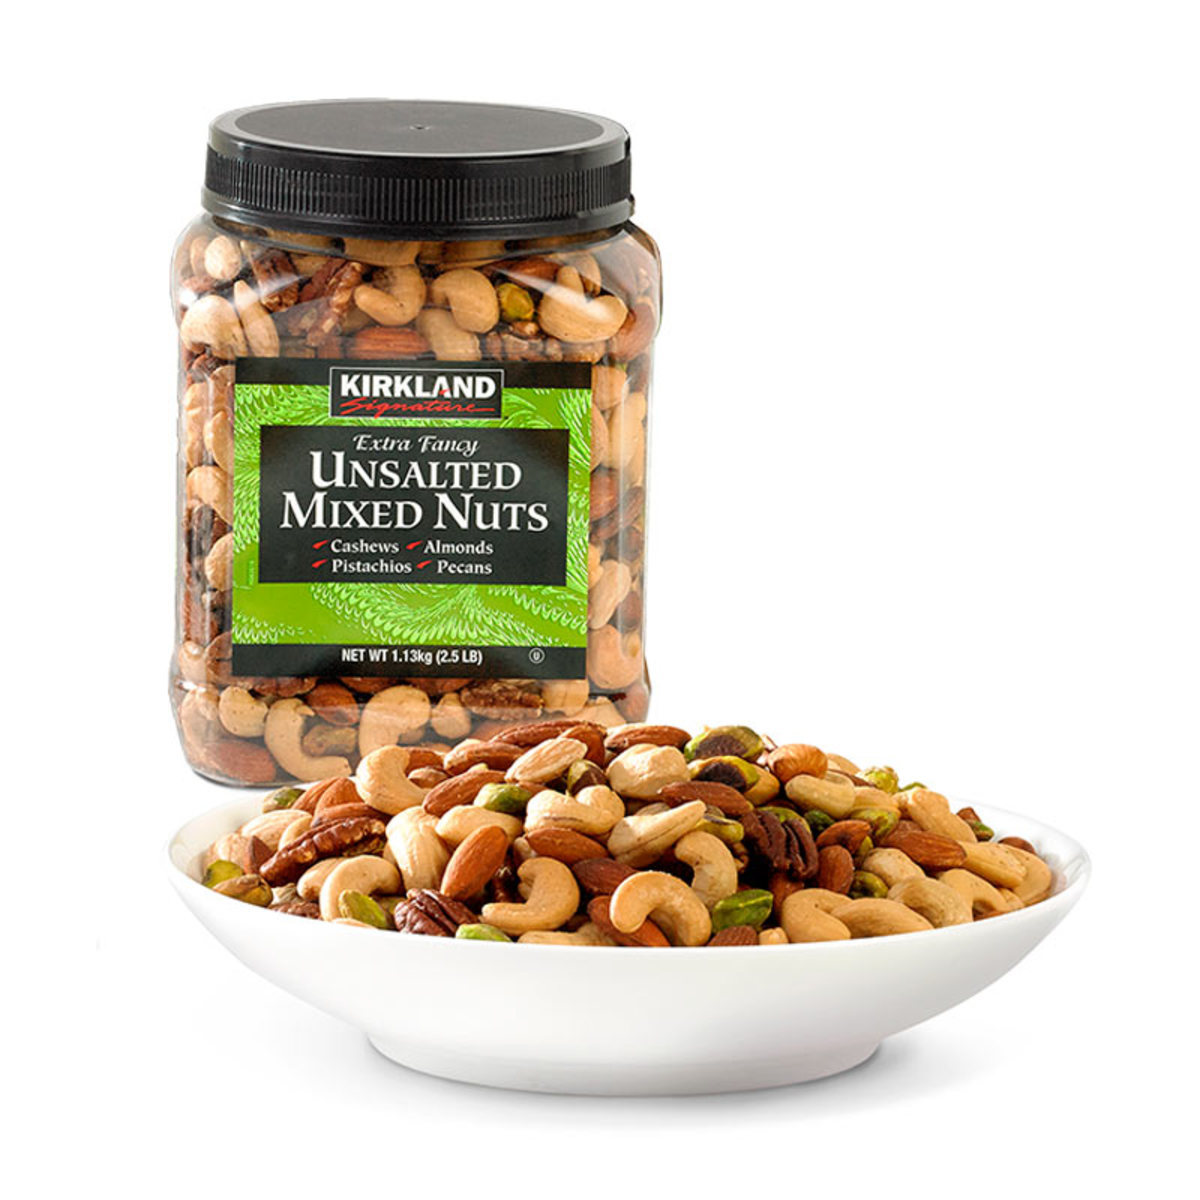 Kirkland Signature Extra Fancy Unsalted Mixed Nuts, 1.13kg